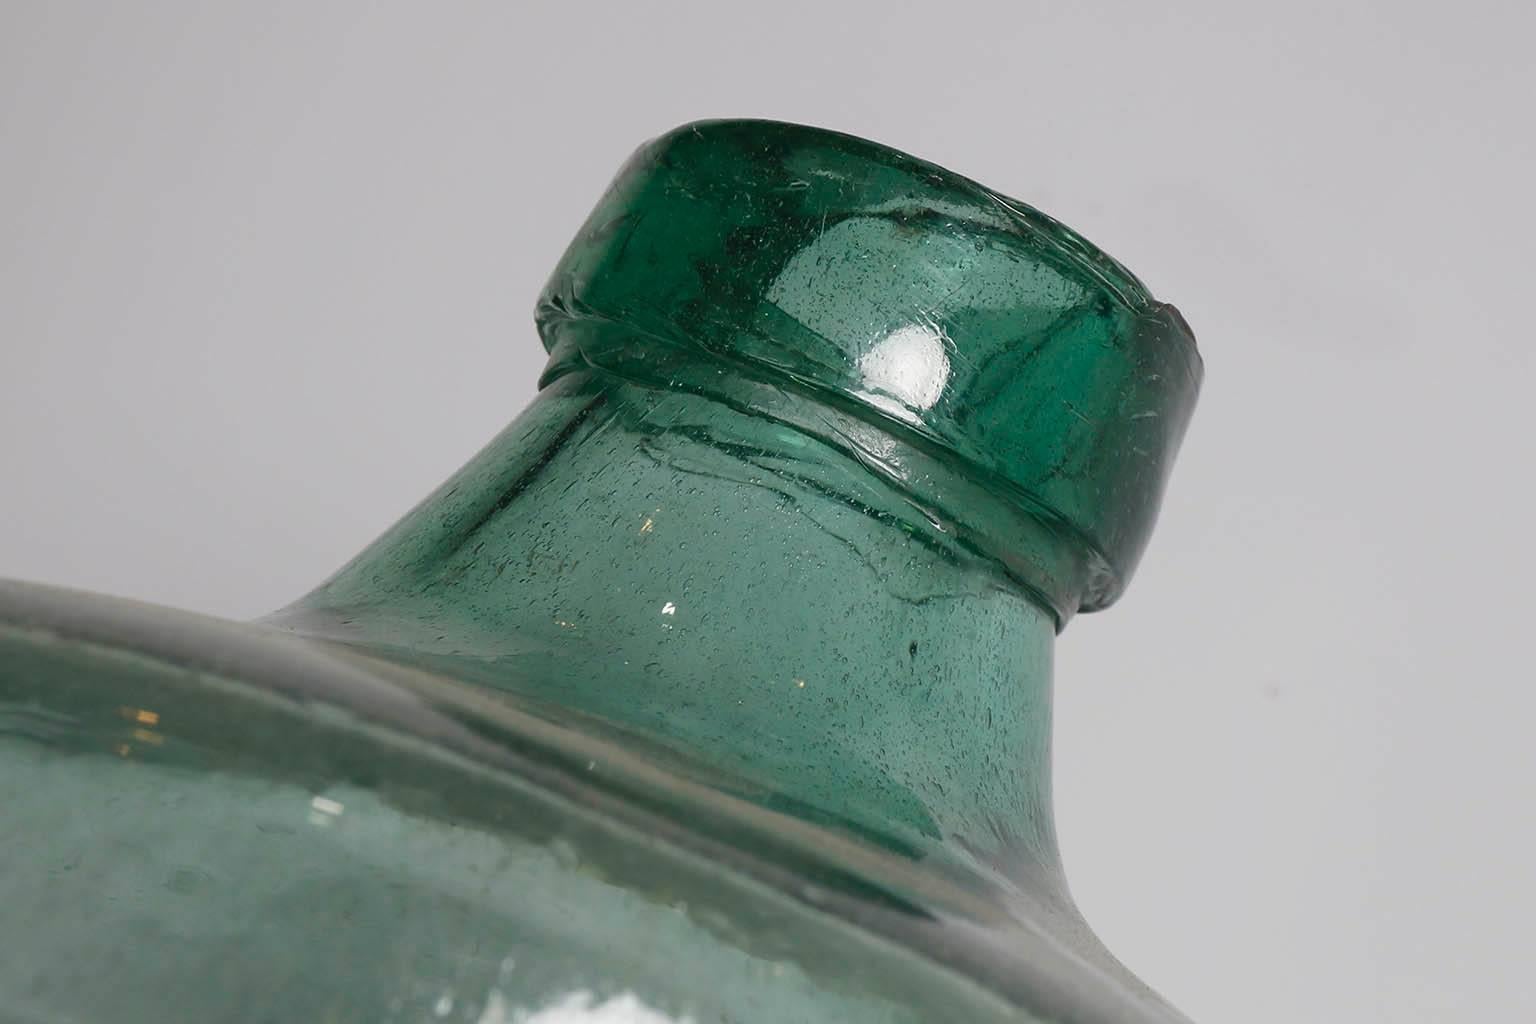 Arts and Crafts 20th Century Green Handblow Glass Bottle/Demijohn from Oaxaca, Mexico